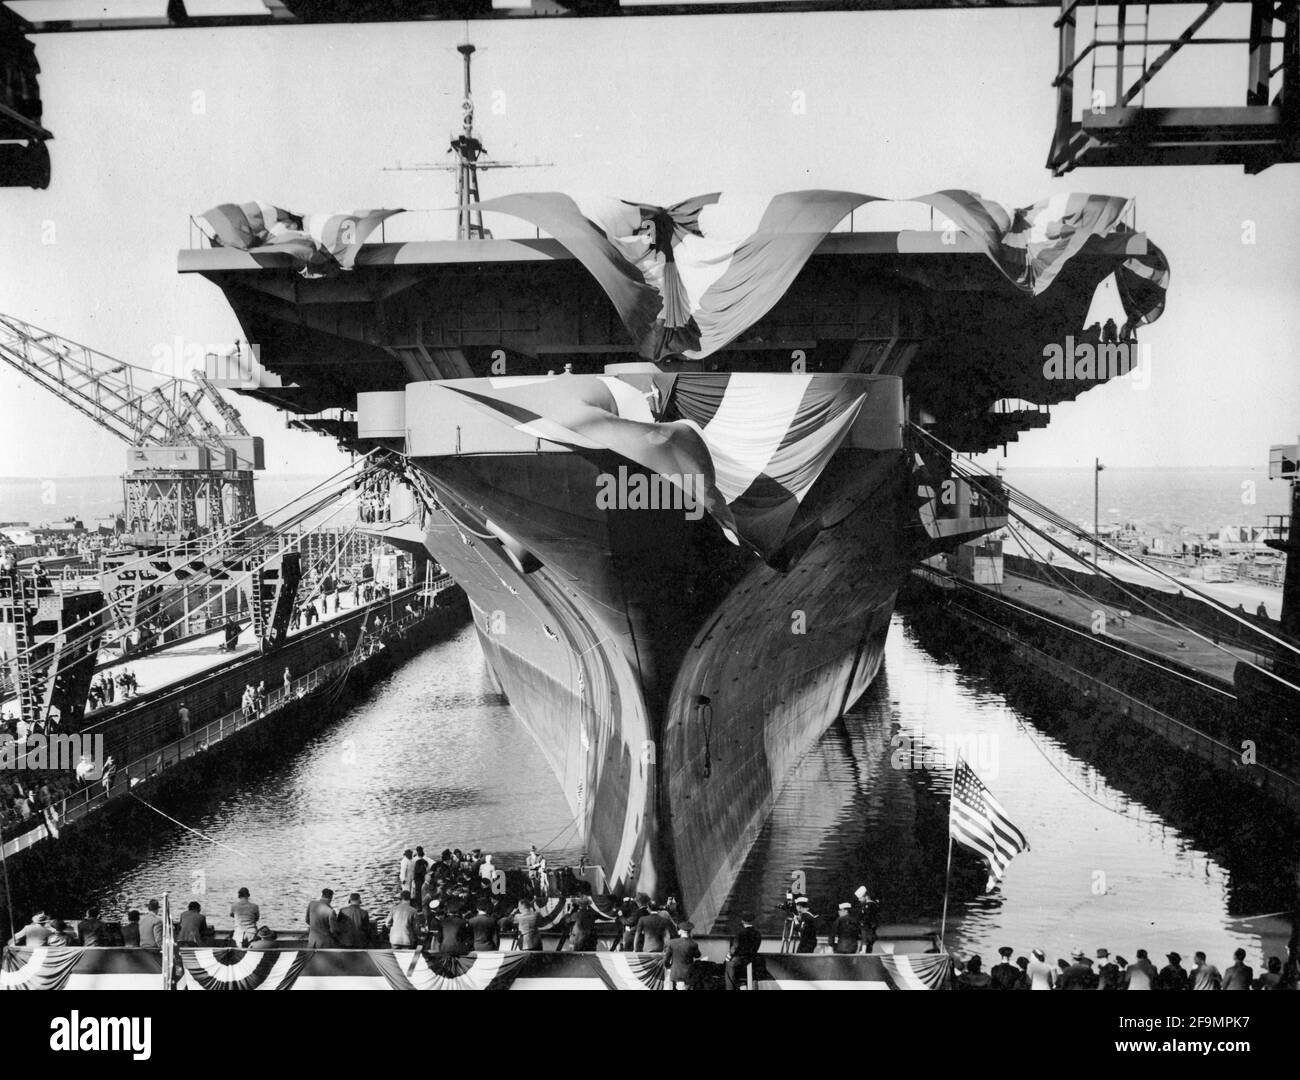 Overall view of the USS Midway, 45,000 ton aircraft carrier, shown during launching ceremonies at the Newport News Shipbuilding and Dry Dock Company. Captain J. F. Bolder, former aide to Artemus L. Gates, Assistant Secretary of the Navy, has been placed in command of the vessel. Among the distinguished guests present at the launching were: Secretary Gates; Vice Admiral Patrick N. L. Bellinger, Air Force Commander of the Atlantic Fleet; Rear Admiral Albert C. Read, first man to pilot an airplane across the Atlantic, now Fleet Air Commander of the Norfolk Naval Air Station; and Rear Admiral E. L Stock Photo